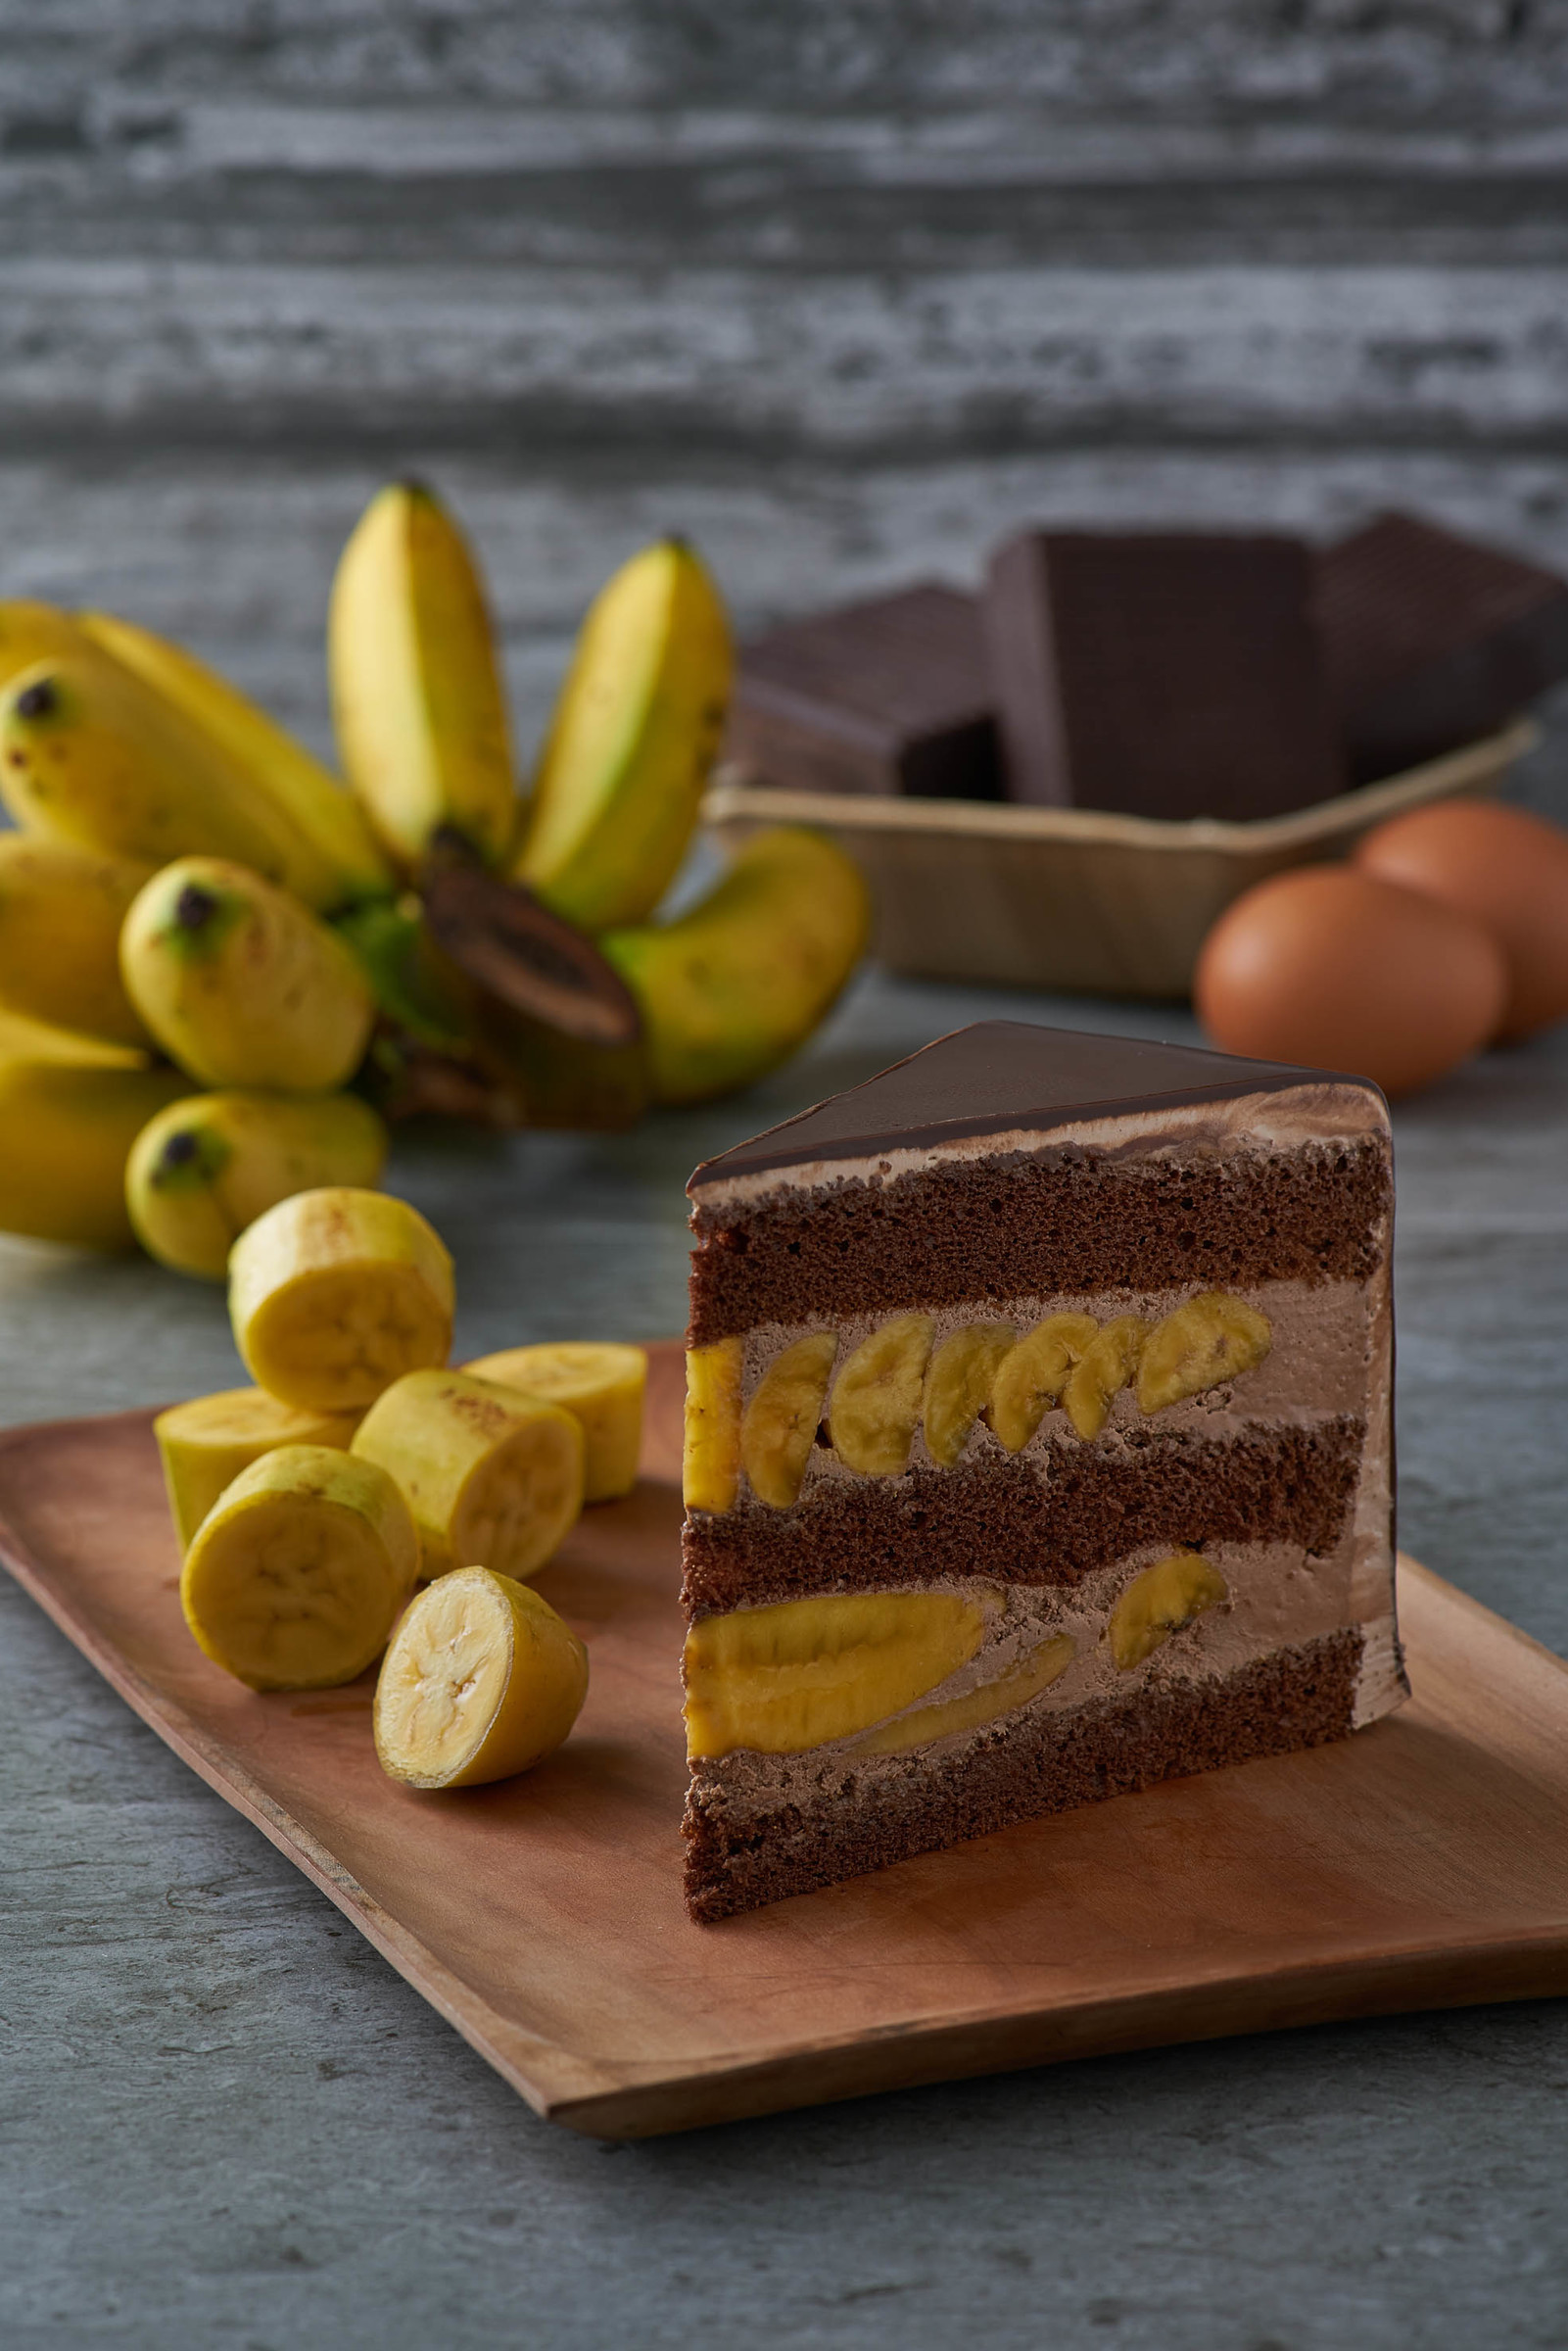 Chocolate Cake with Cream and Banana - Uncommonly Delicious